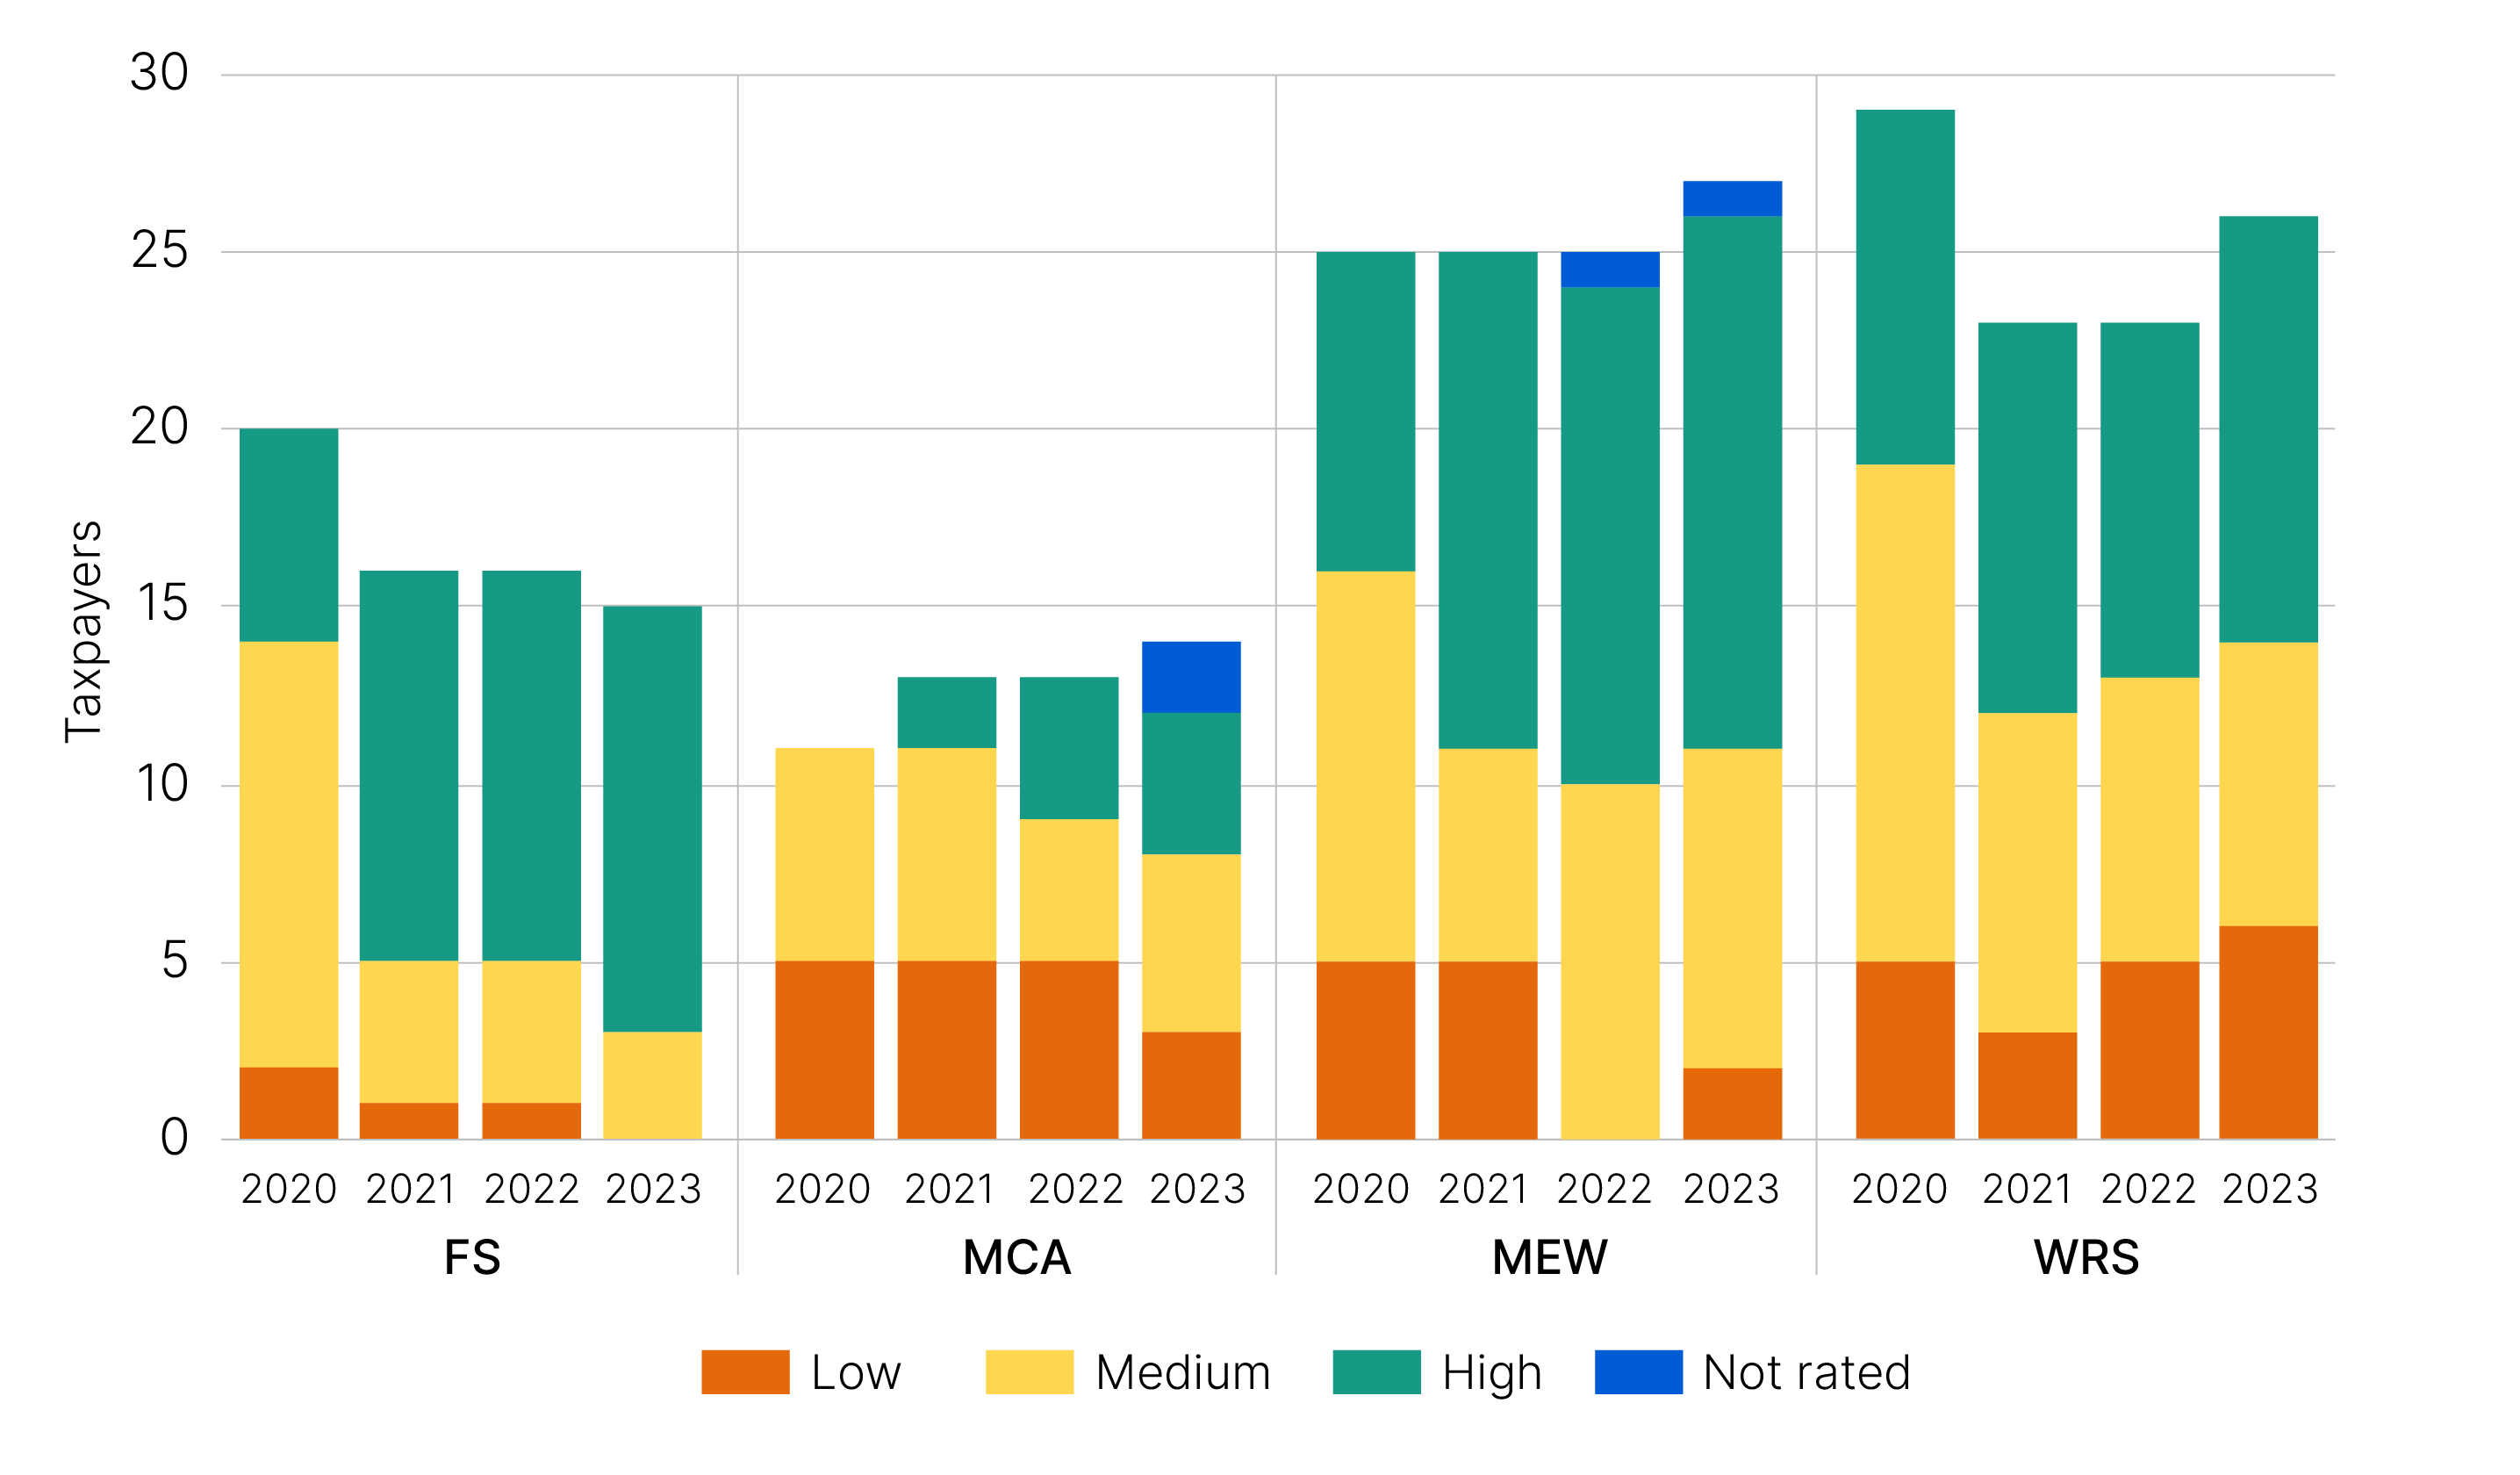 Bar graph shows overall assurance ratings for FS, MCA, MEW, WRS, for the years 2020 – 2023.